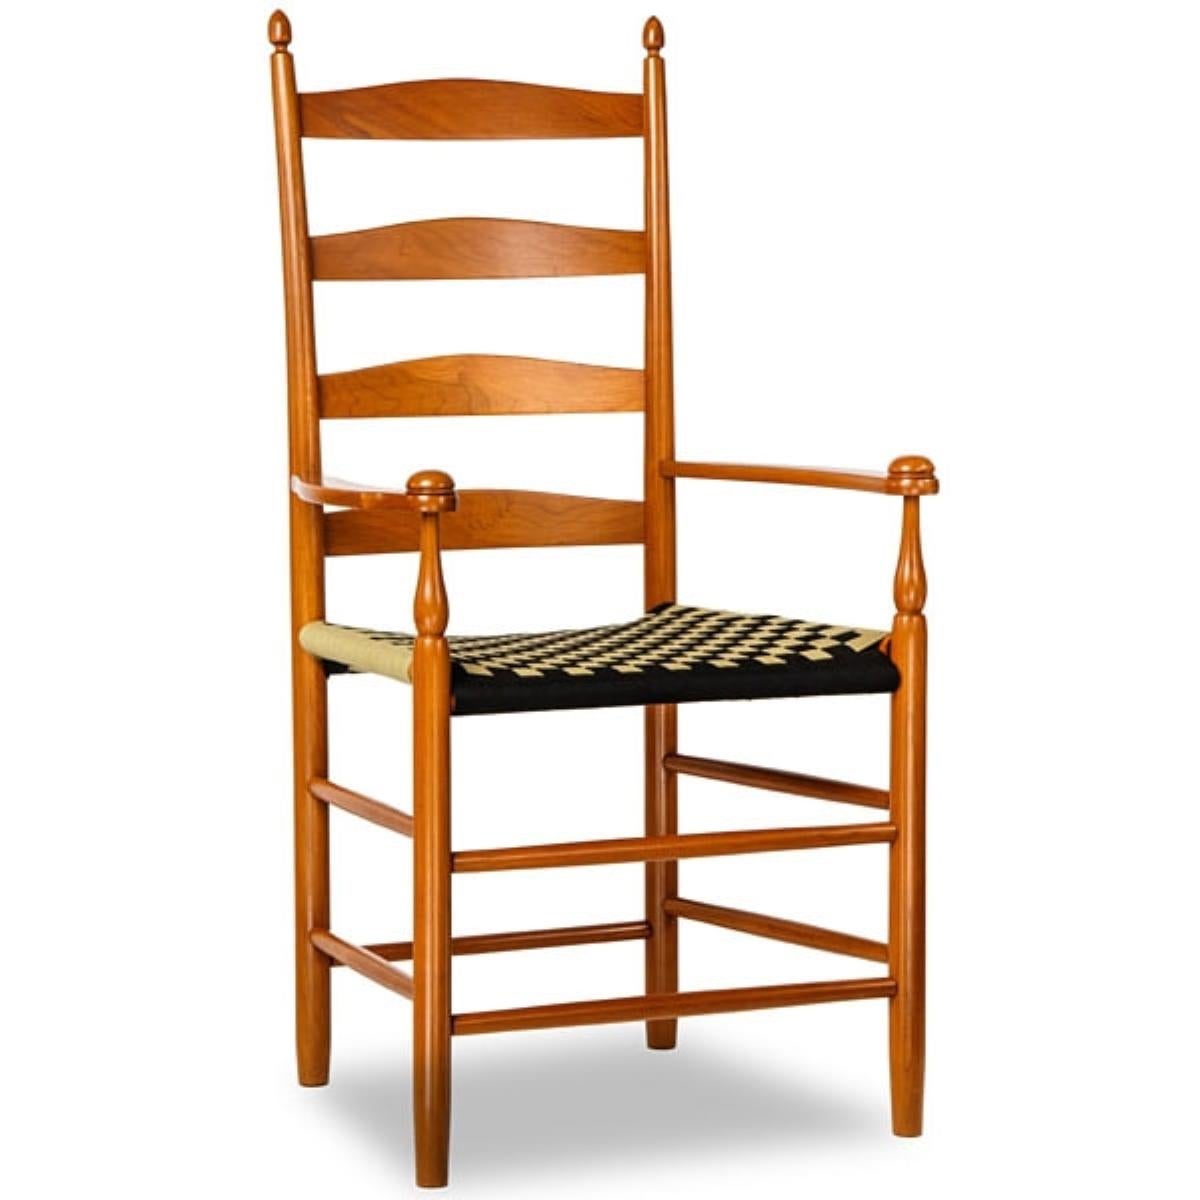 Victorian The Shaker Ladder Slat Straight Back Arm Chair For Sale